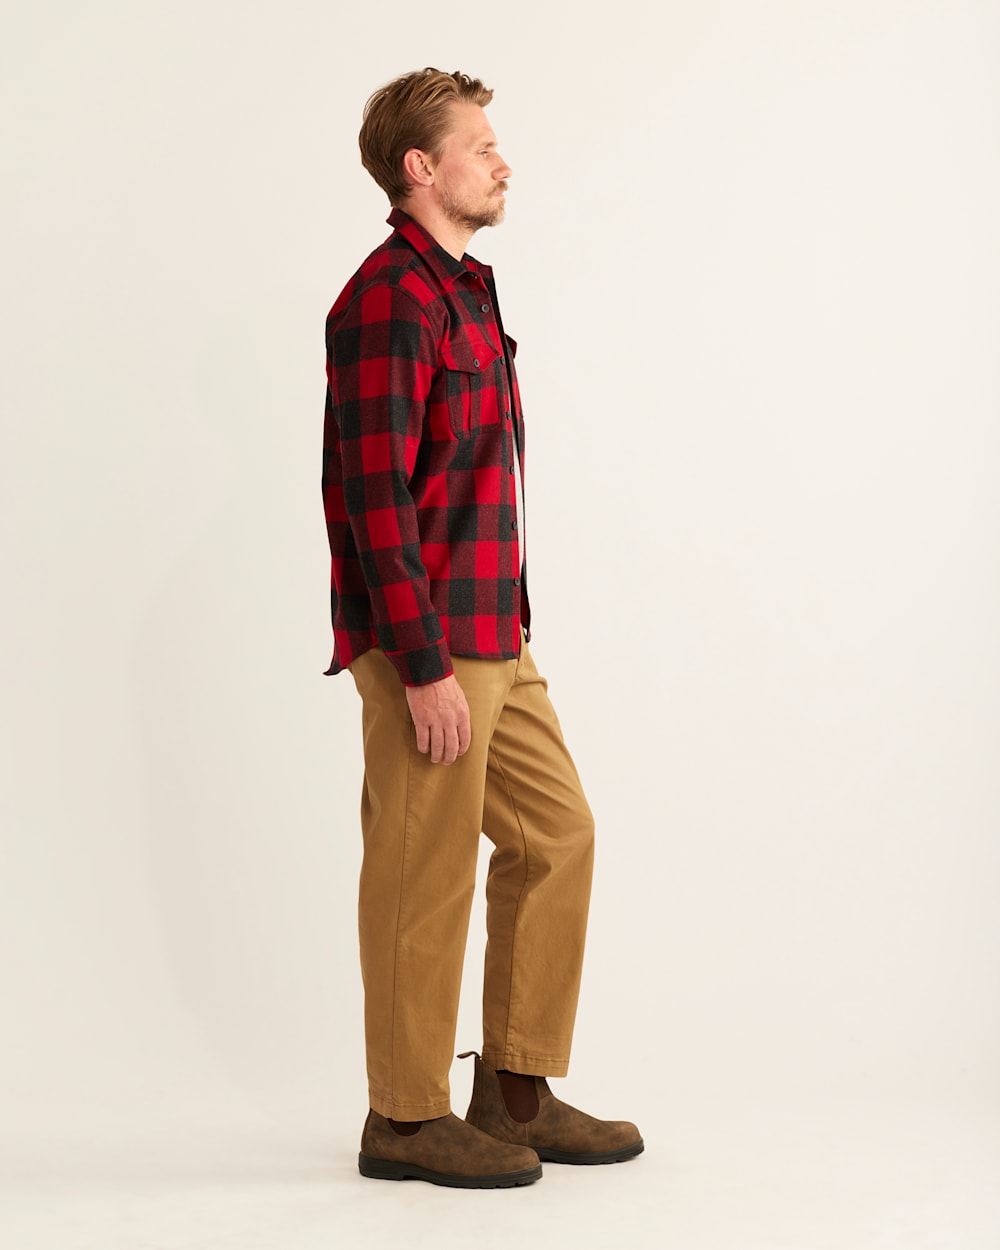 Look Stylish & Sharp by Shopping the Men's Scout Shirt | Pendleton